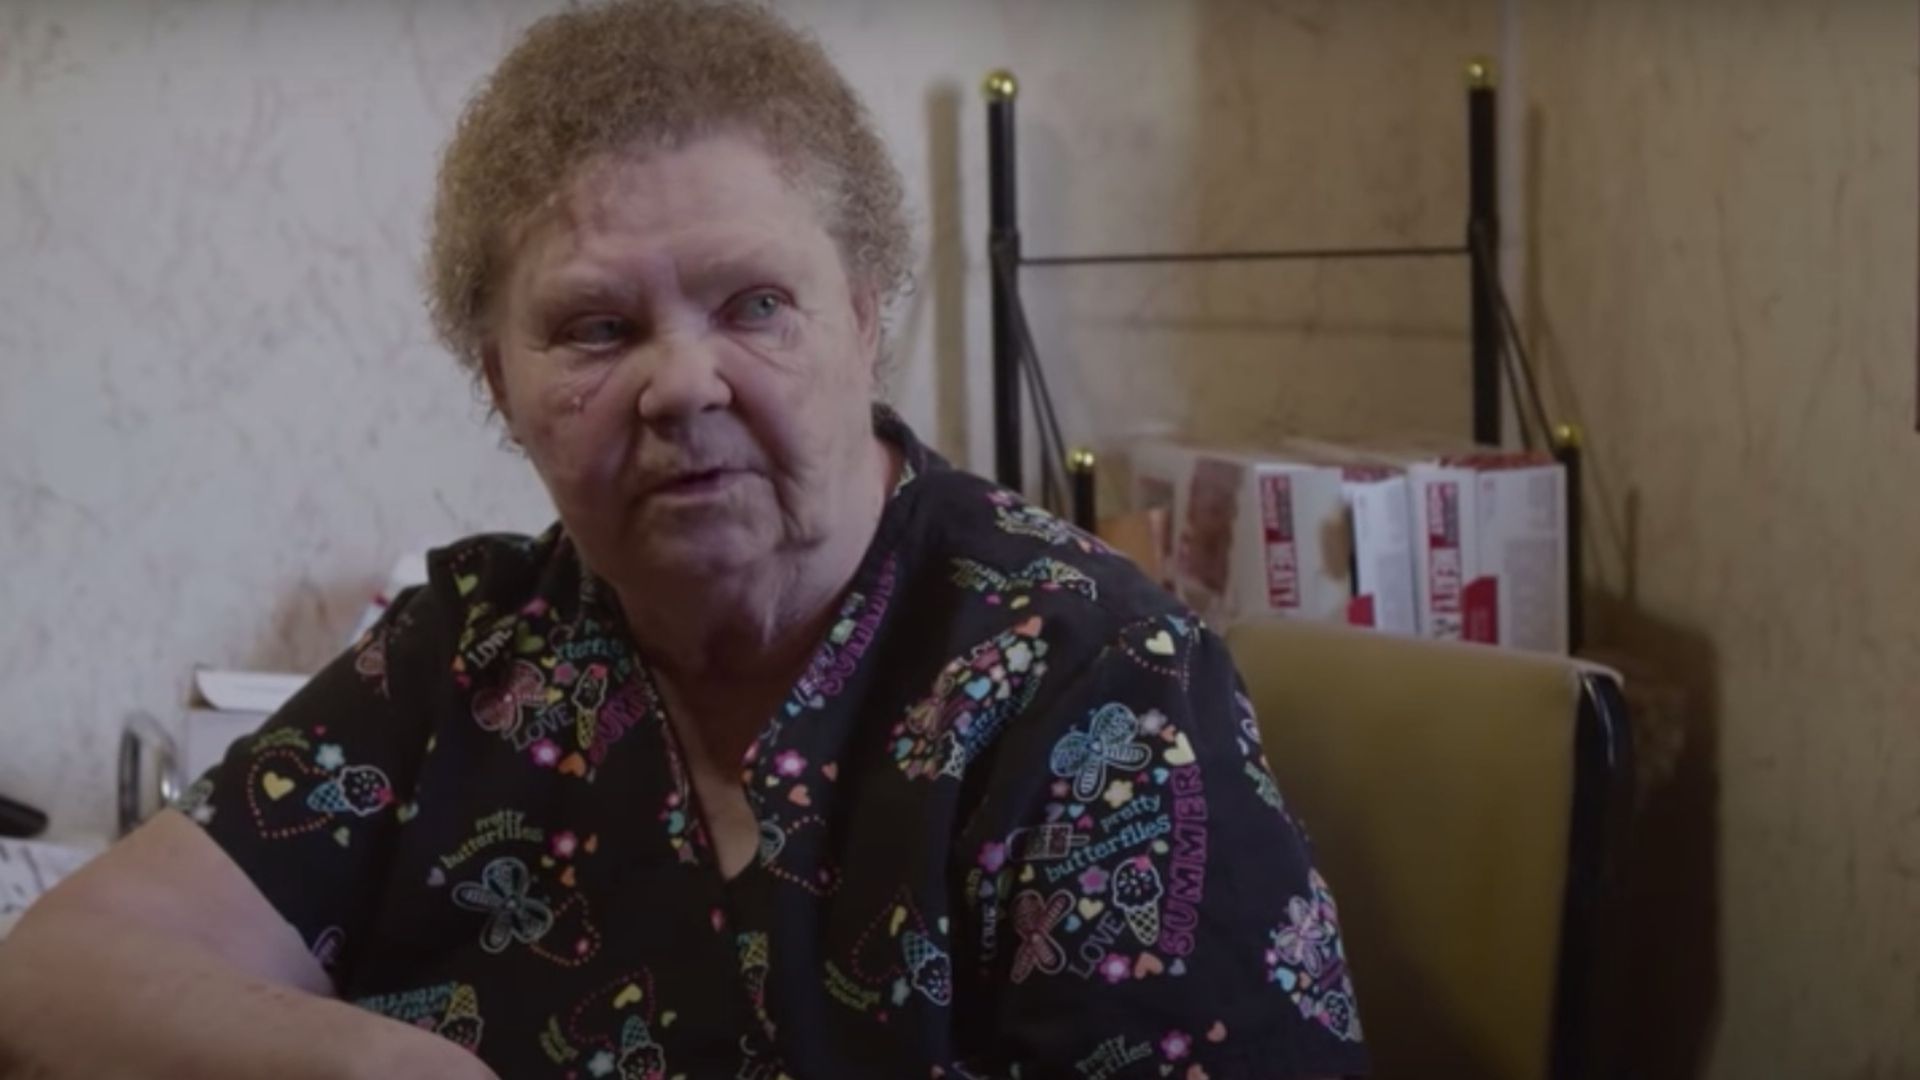 Making a Murderer: Steven Avery's mother Dolores dies aged 83